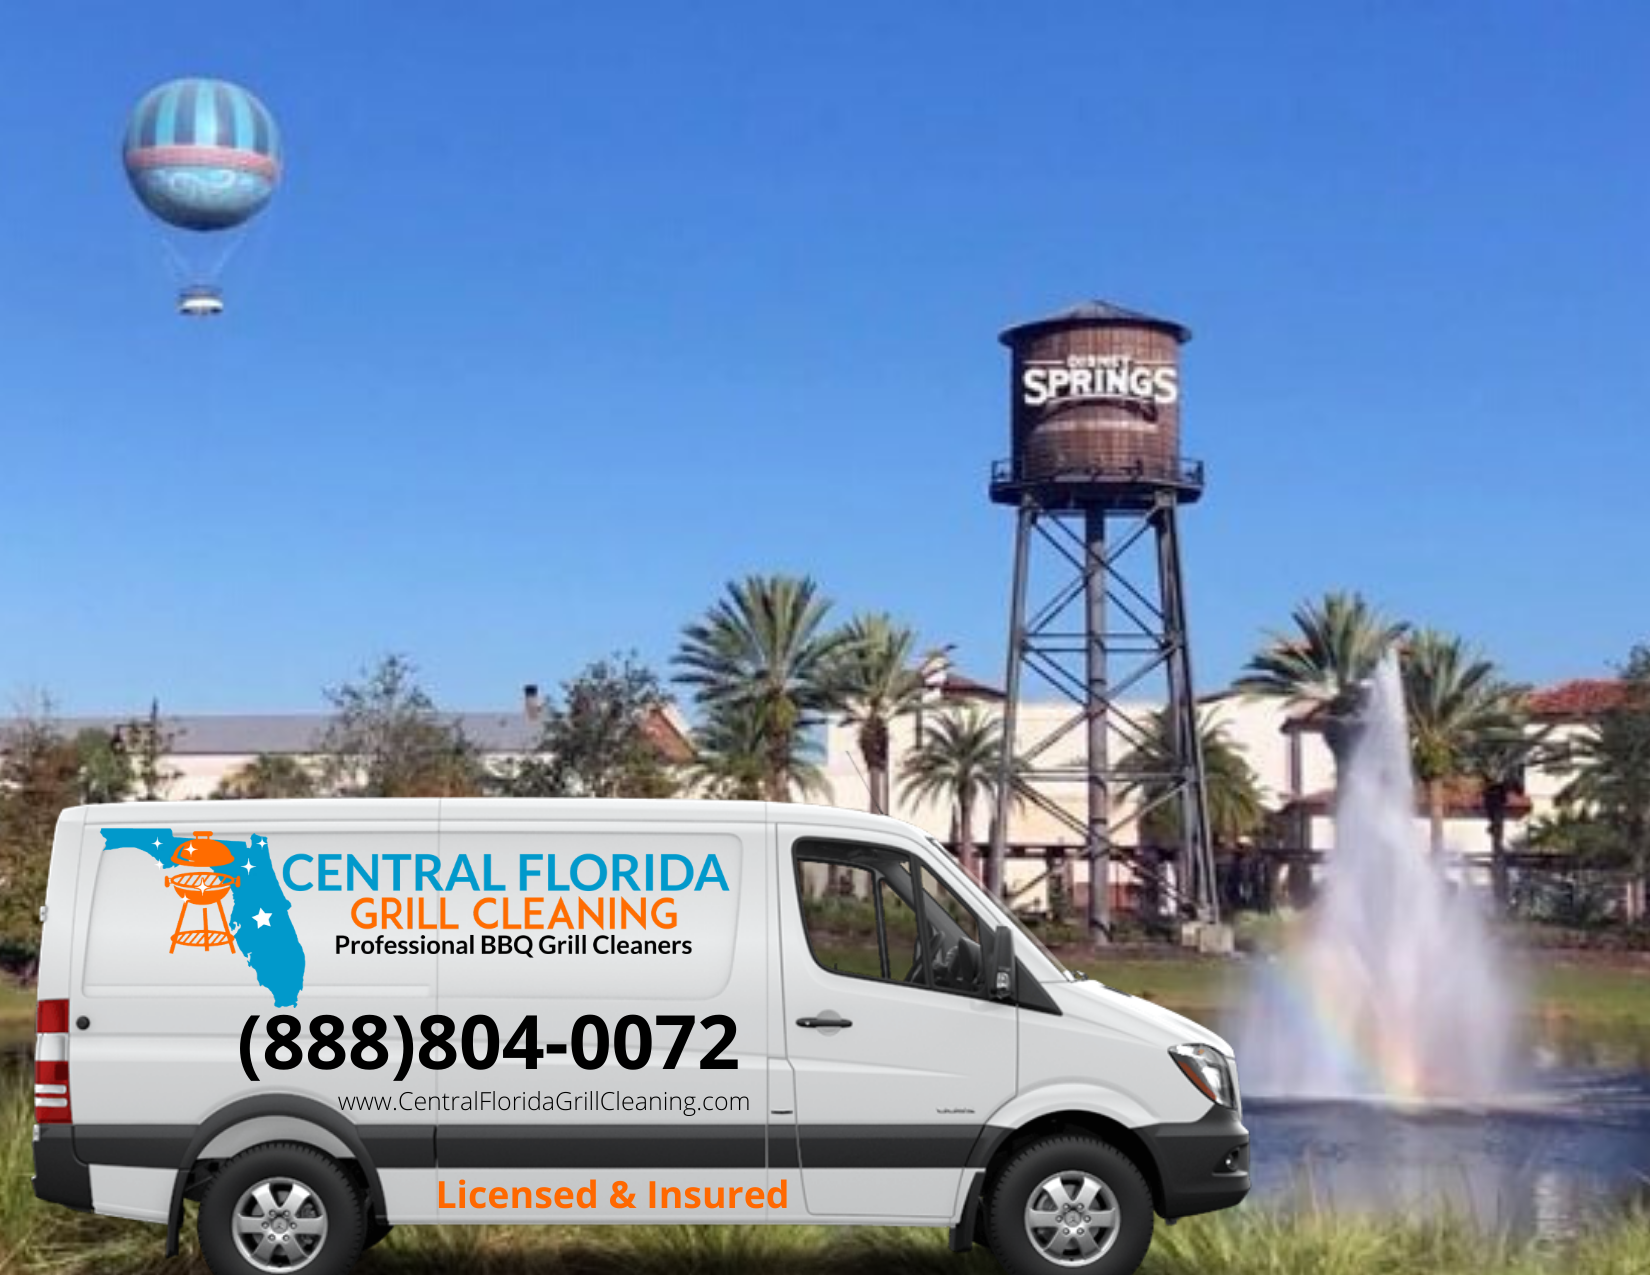 https://www.centralfloridagrillcleaning.com/wp-content/uploads/2020/05/grill_cleaning_orlando.png